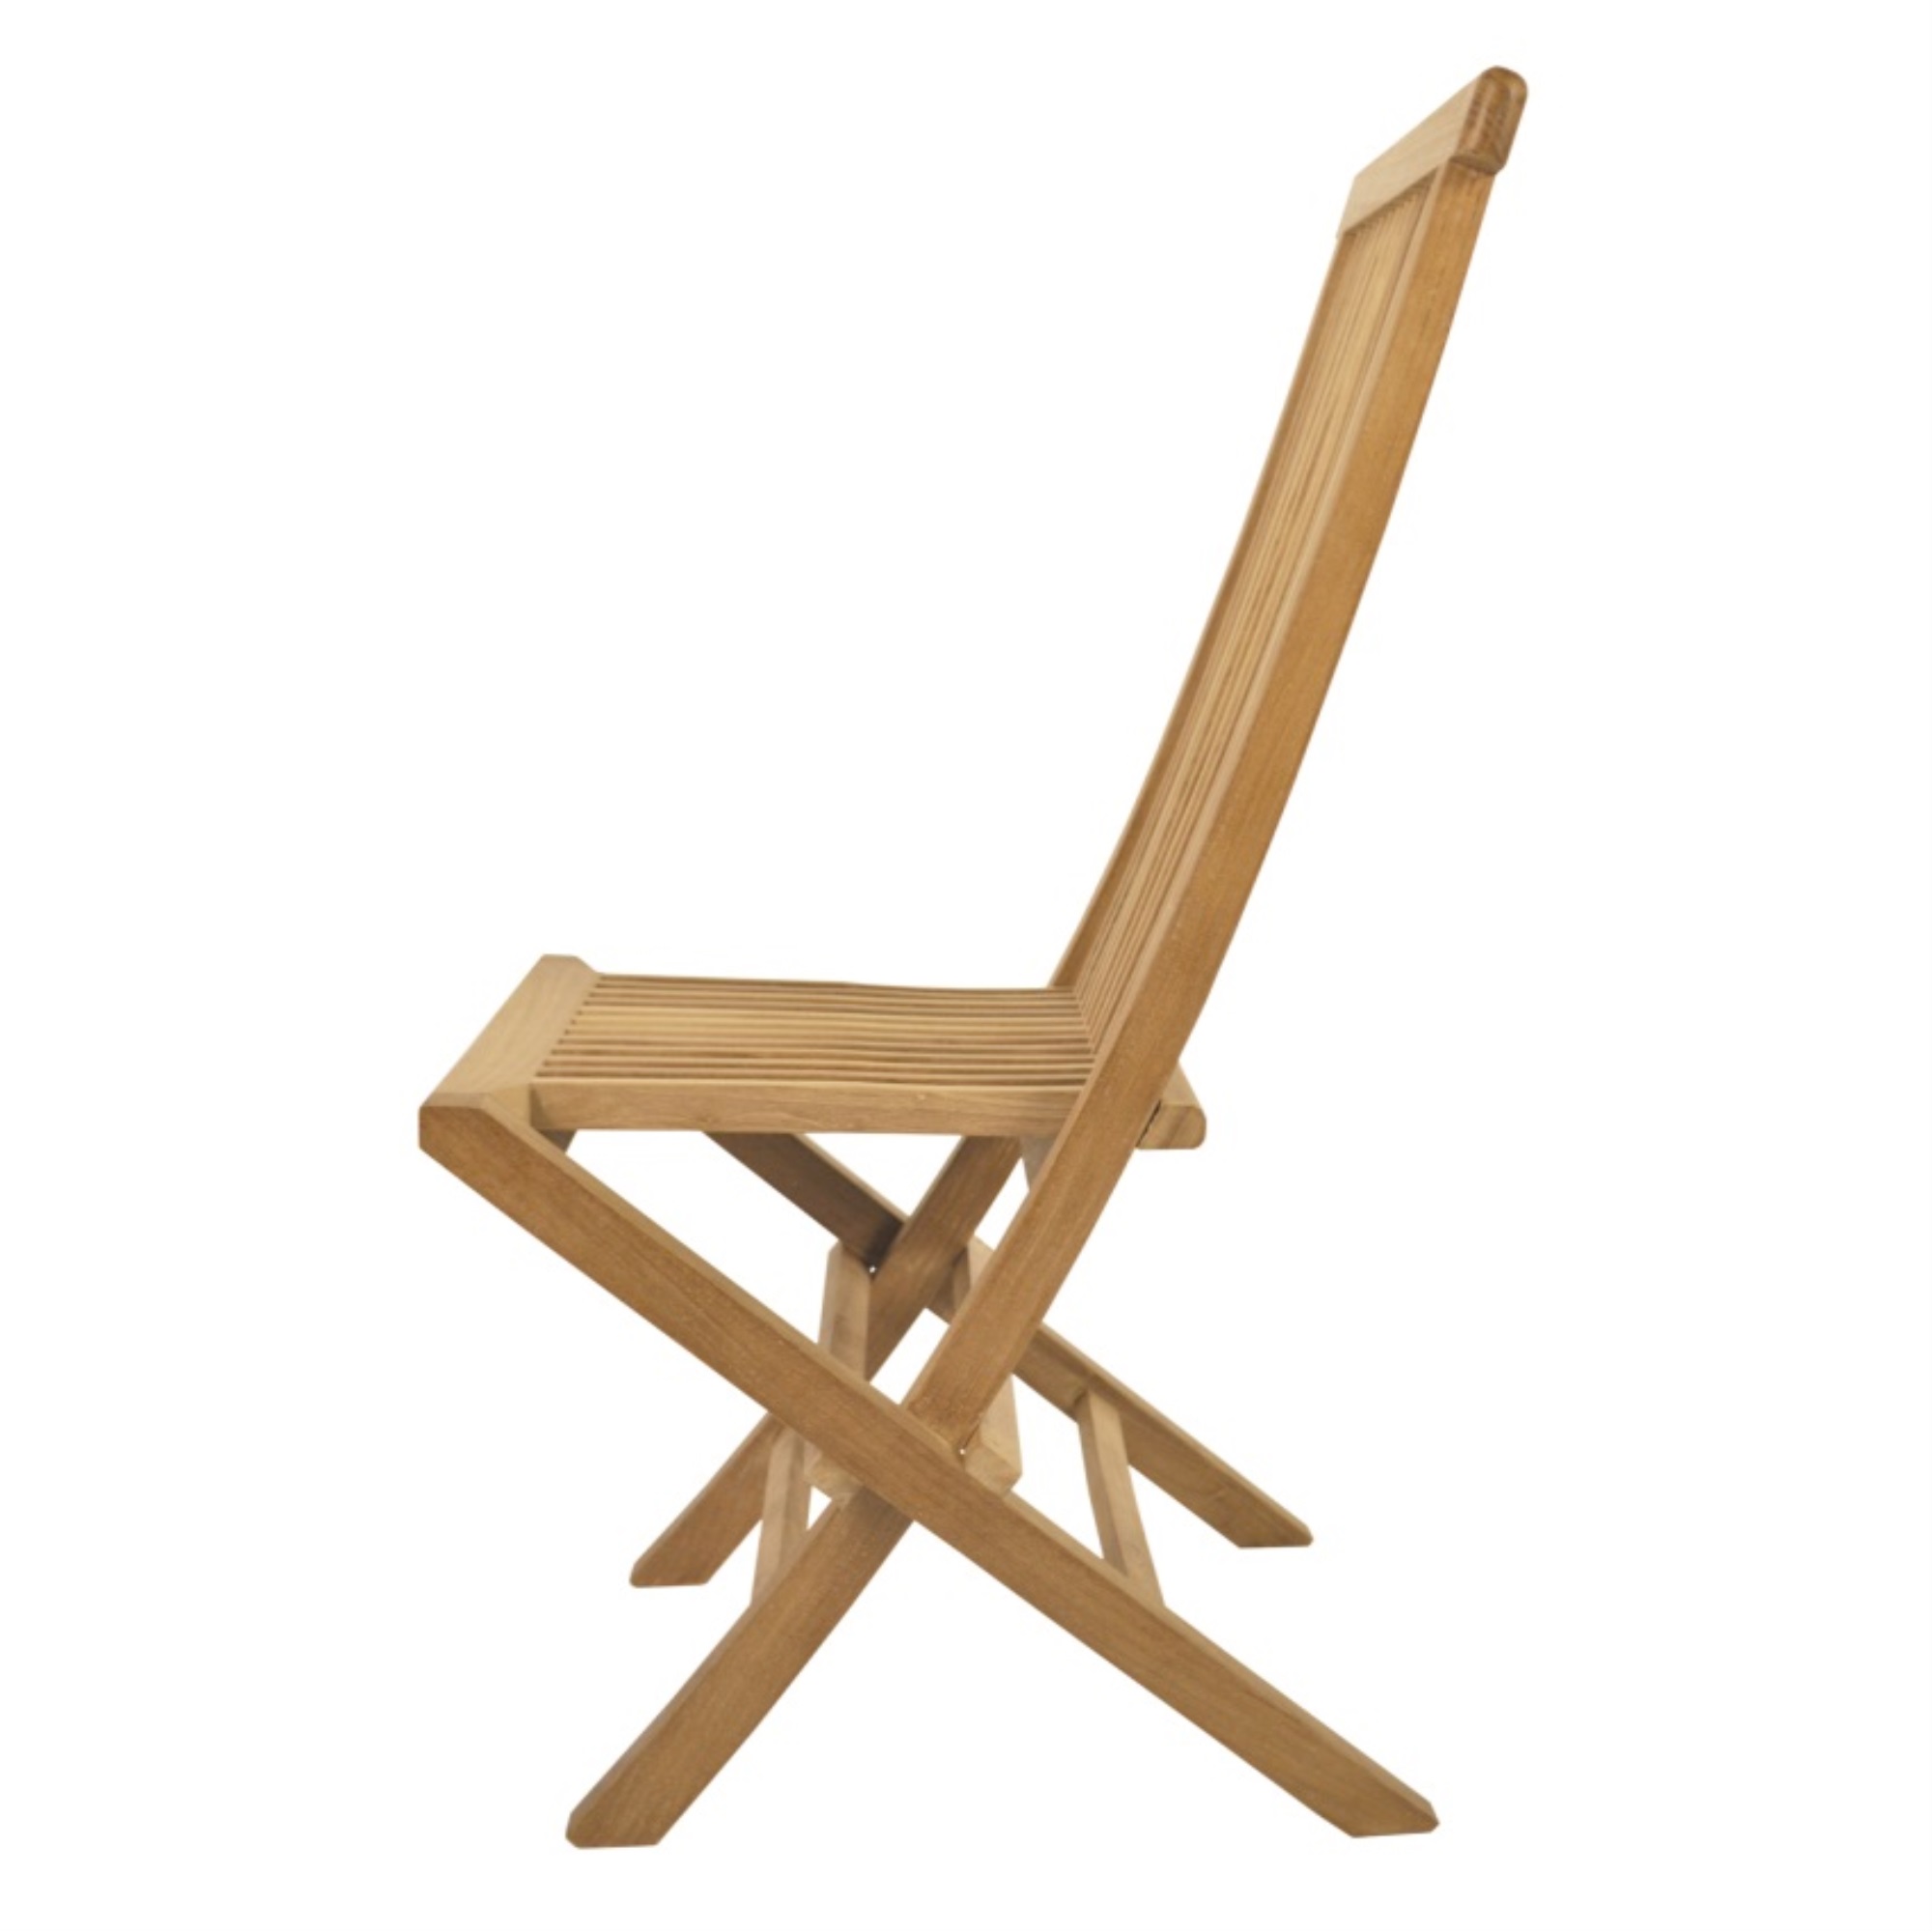 Anderson Teak Classic Folding Chair - image 5 of 5